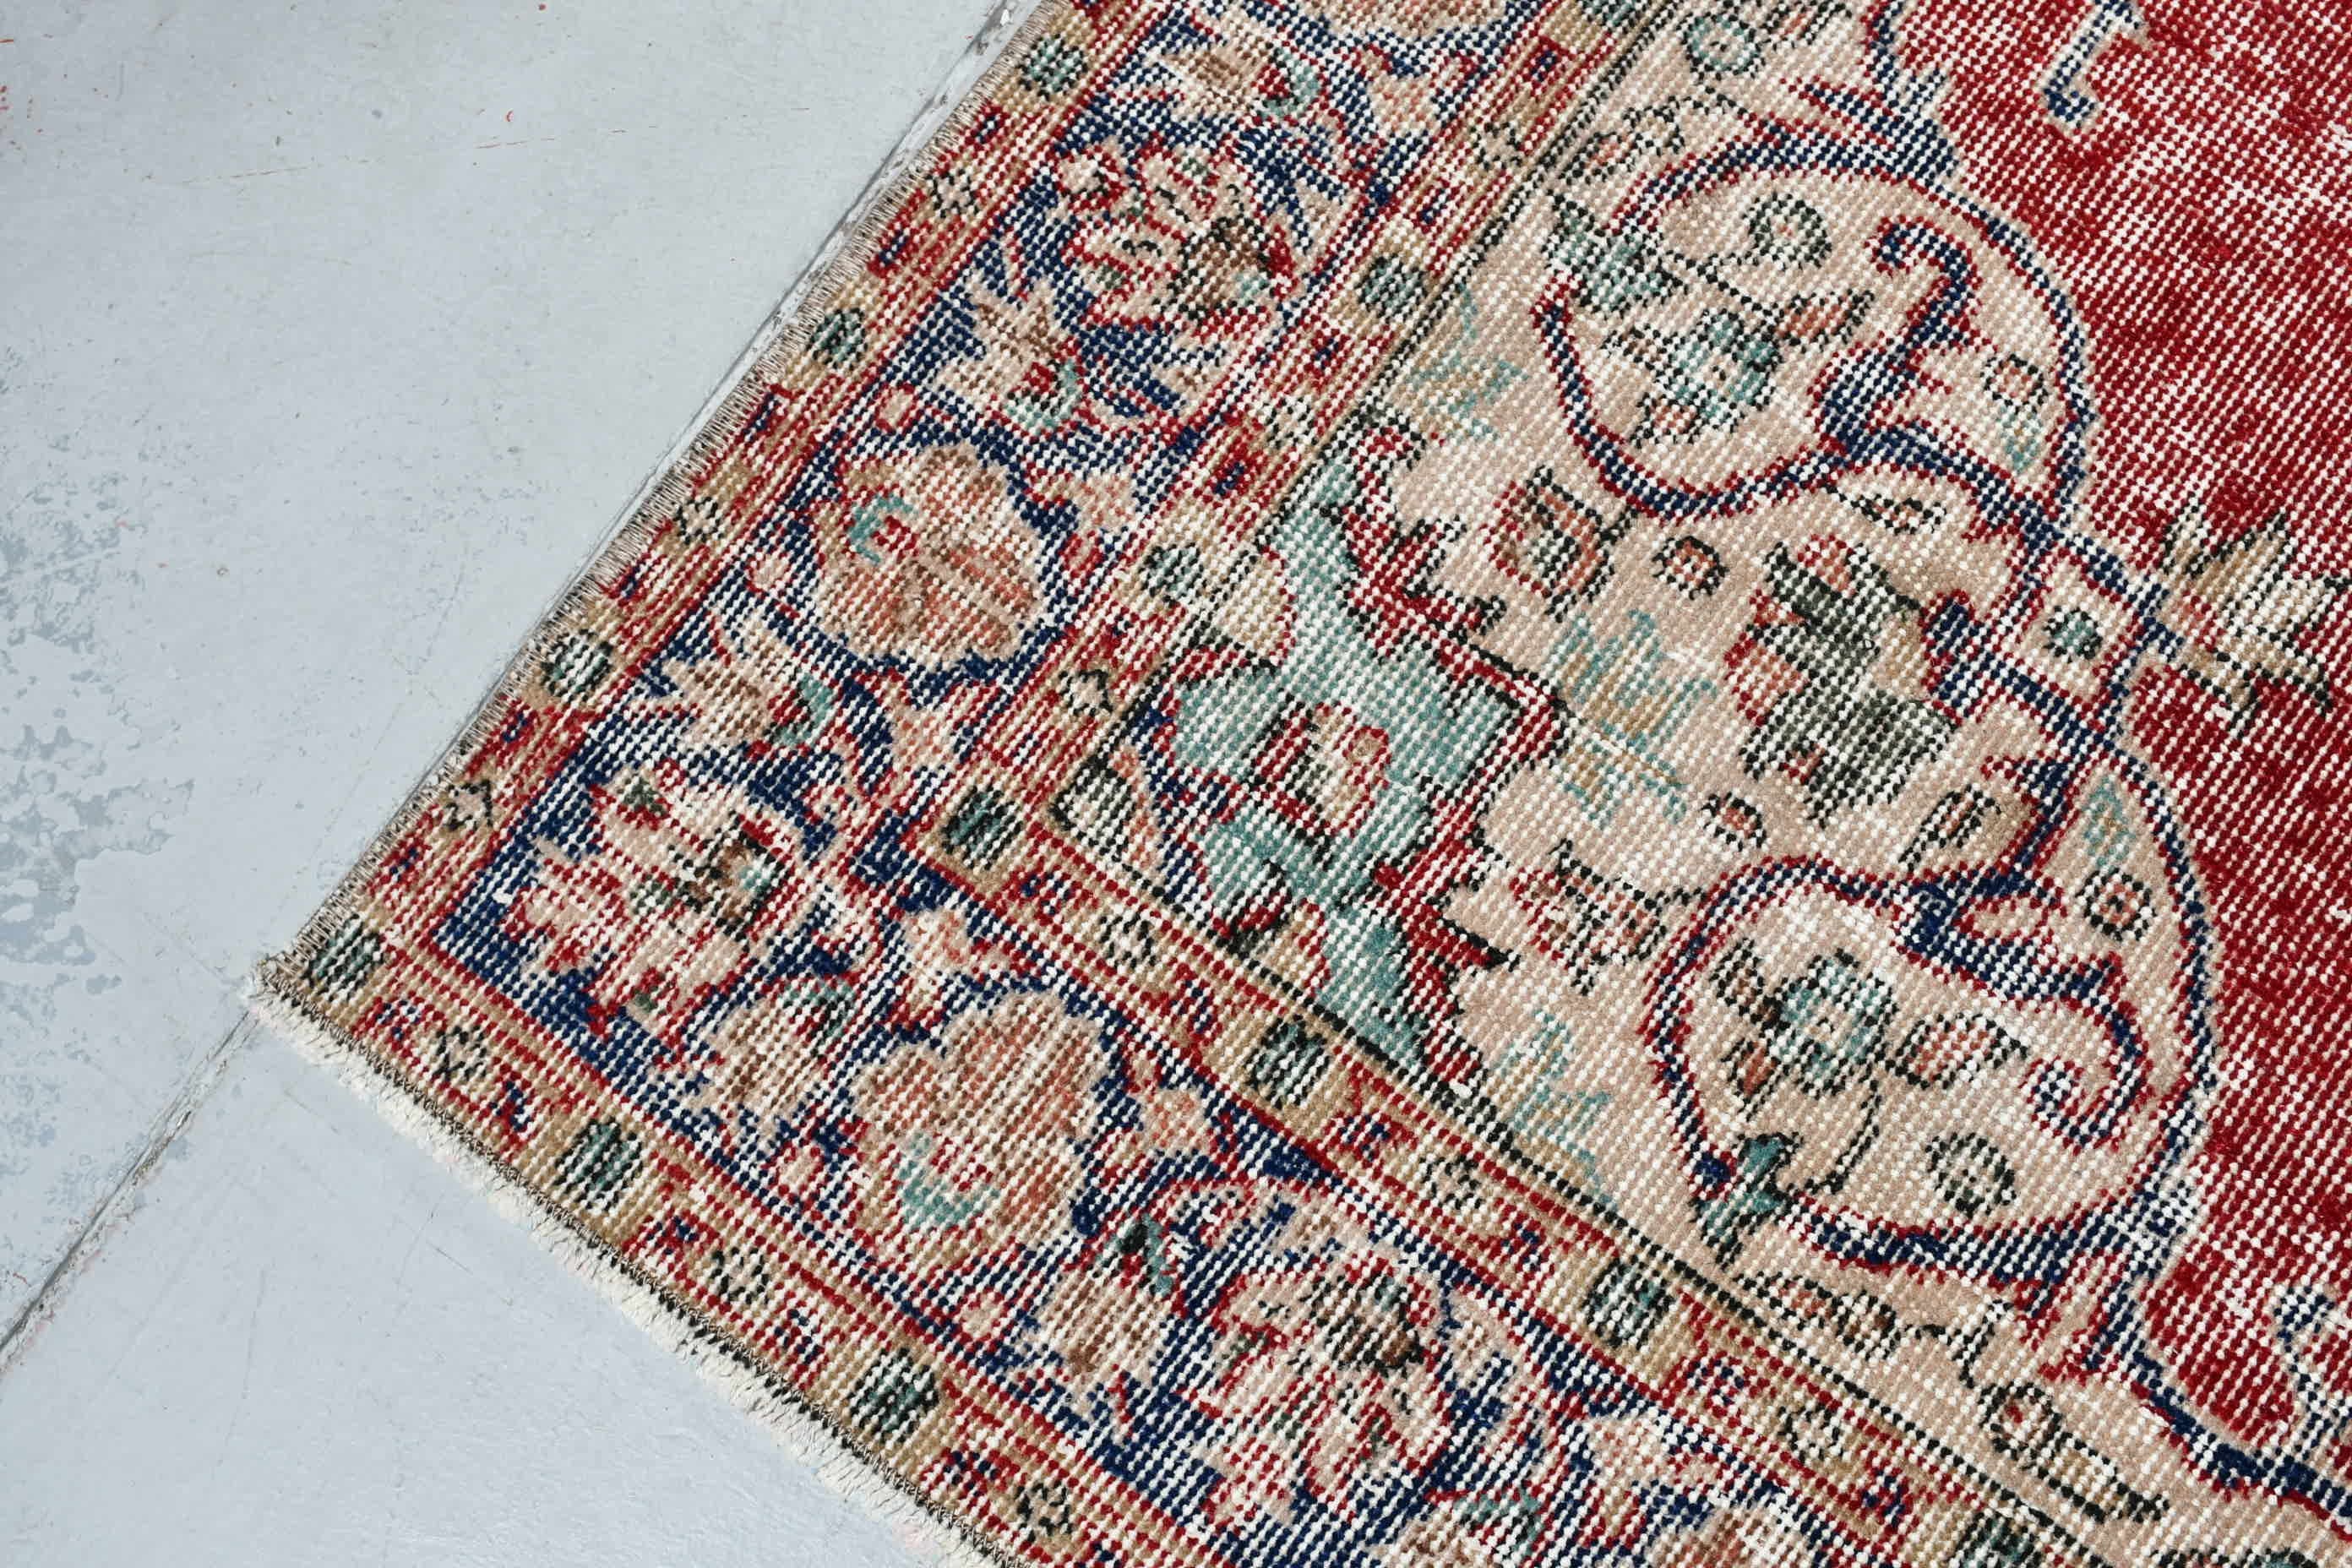 Kitchen Rugs, Oriental Rug, Home Decor Rugs, Rugs for Bedroom, Muted Rug, Turkish Rug, Vintage Rugs, Red  4.7x7.3 ft Area Rugs